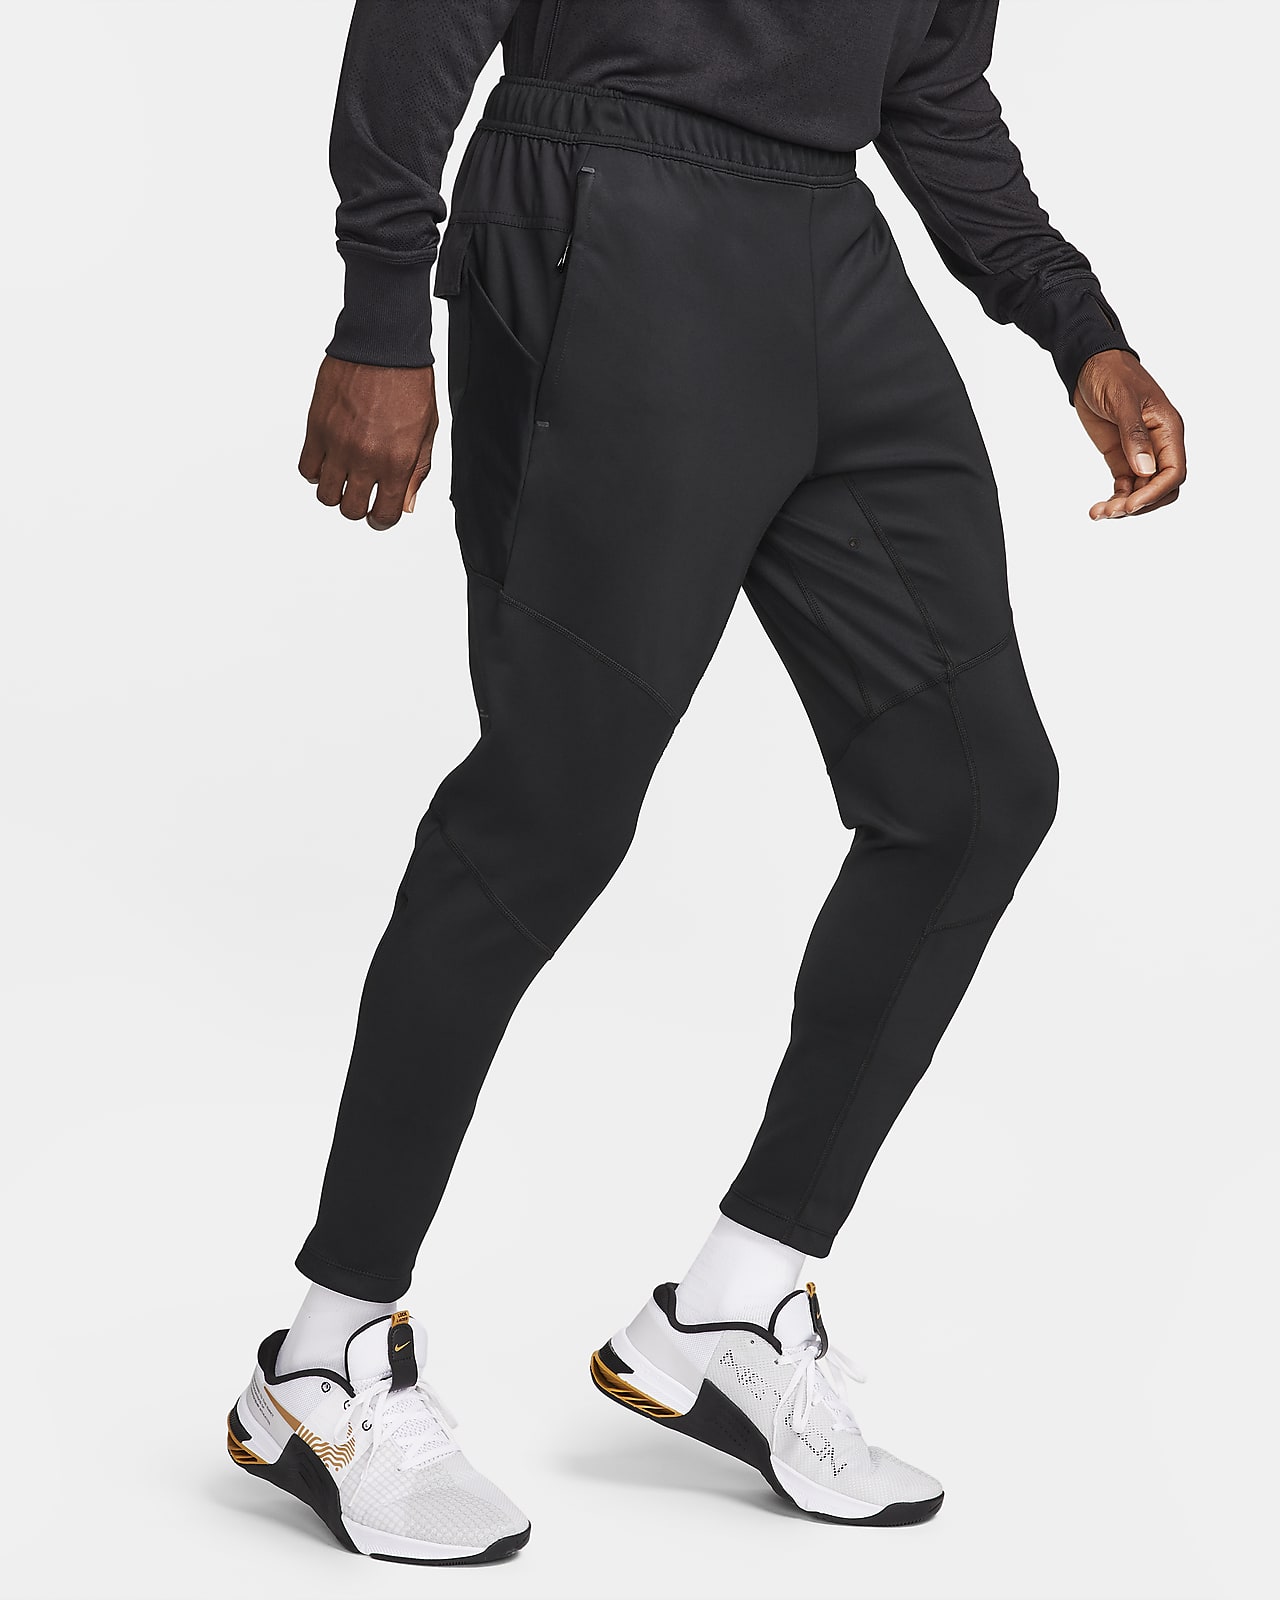 Nike Dri-FIT ADV Axis Men's Utility Fitness Trousers